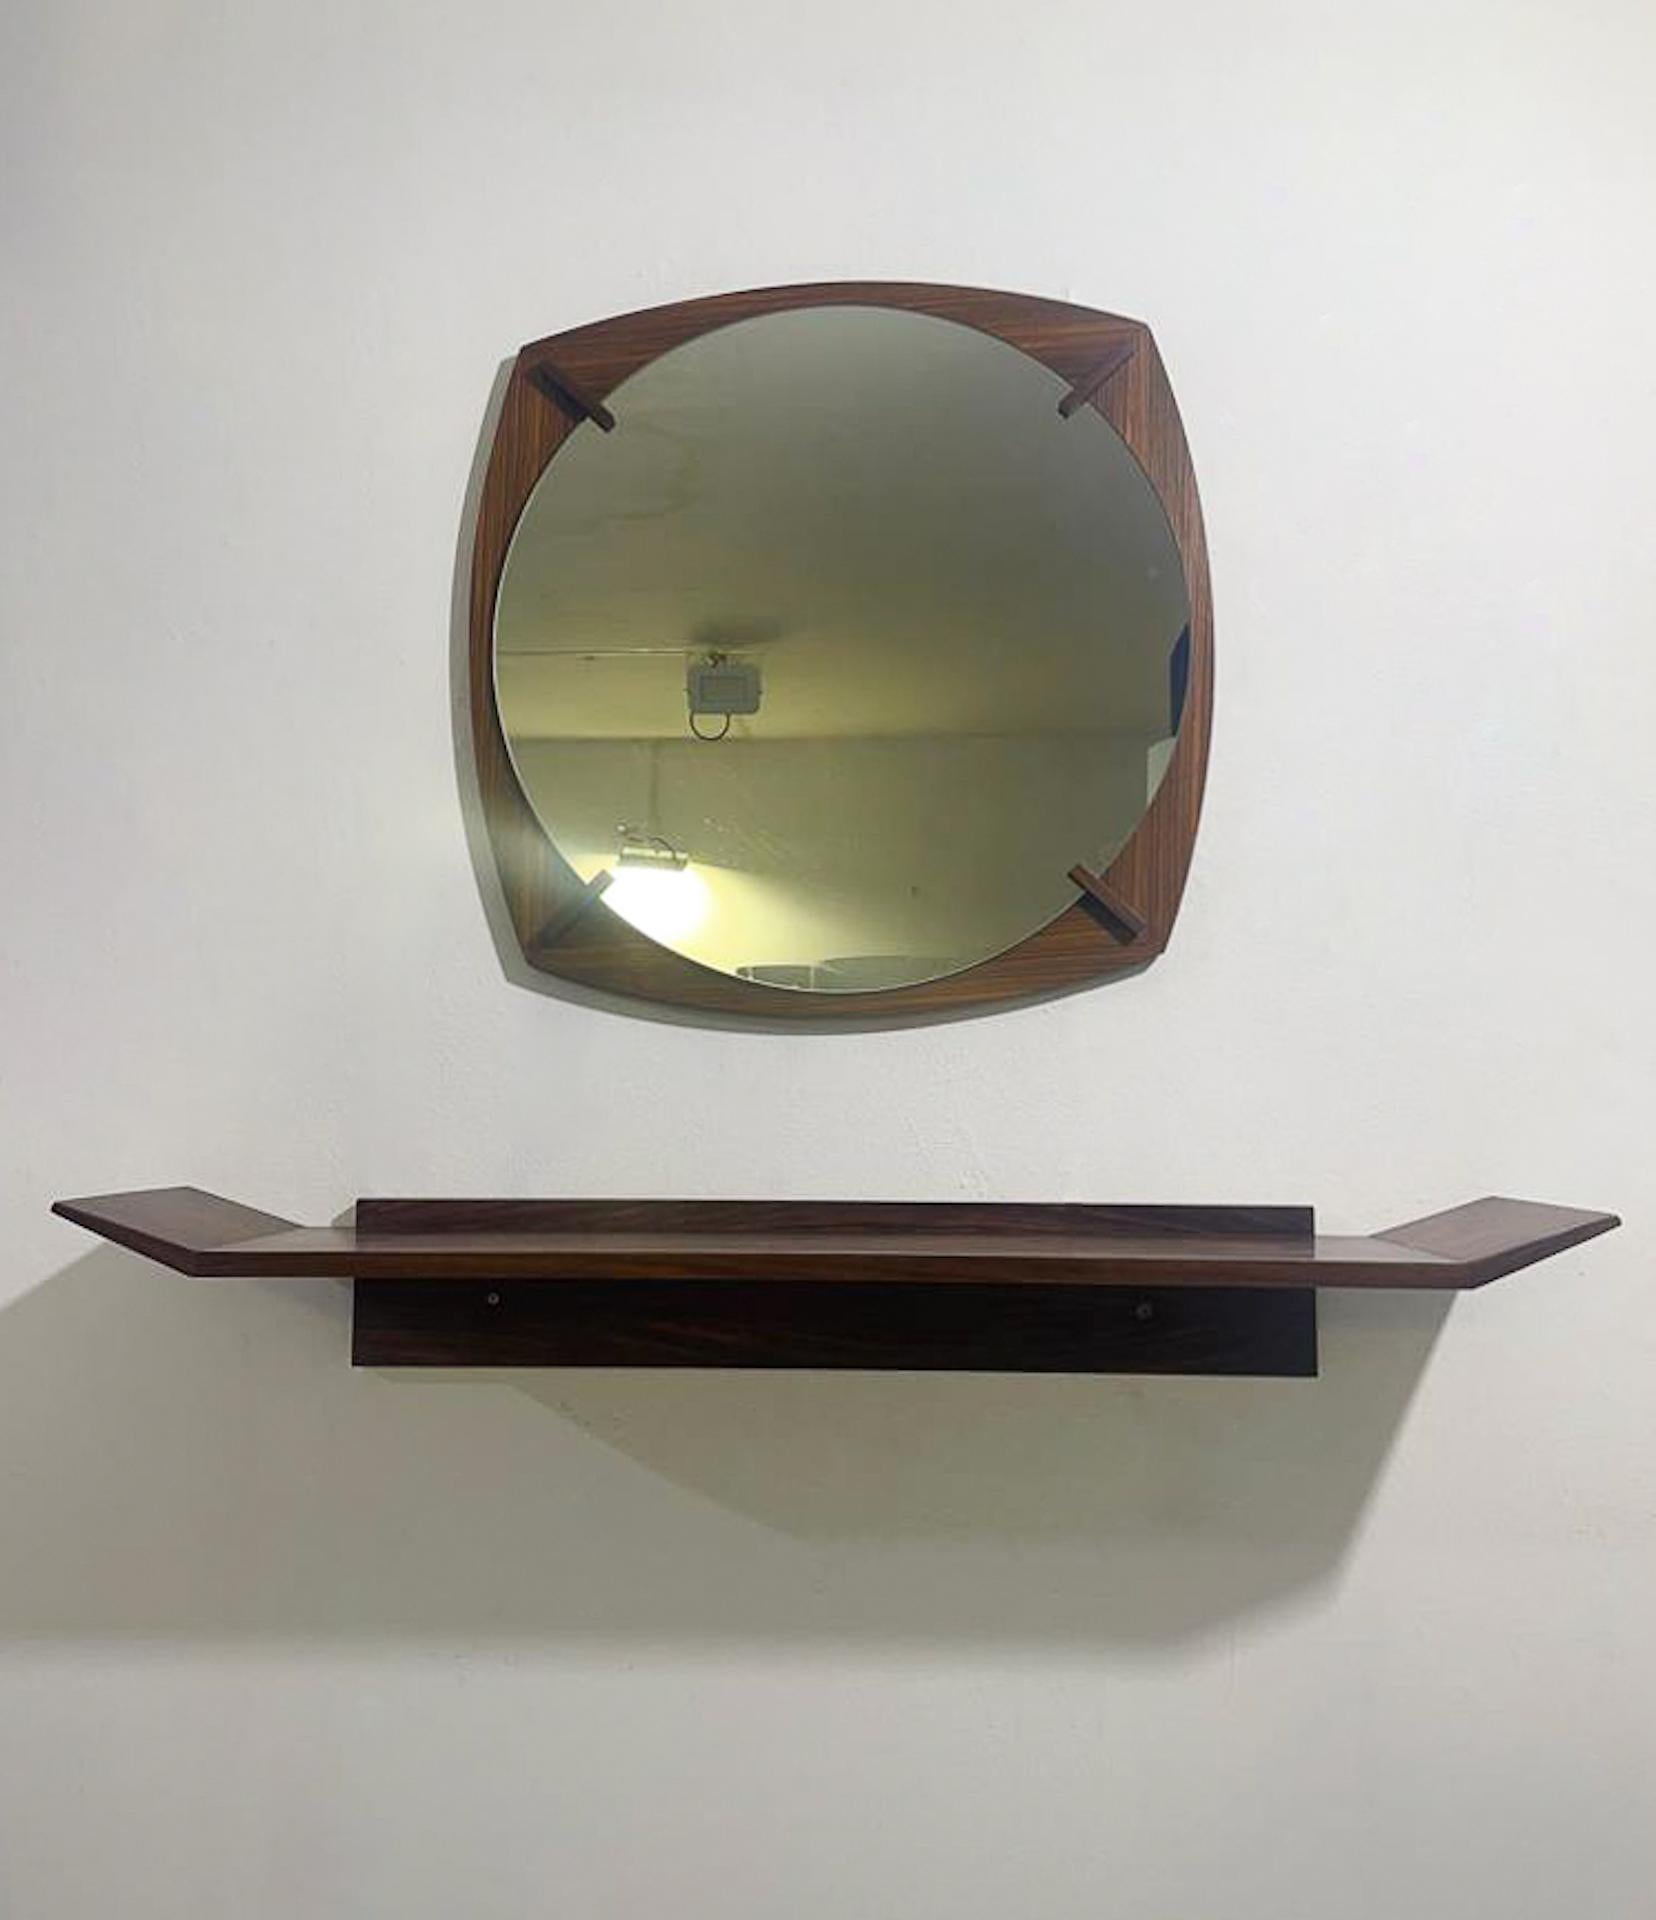 Mid-Century Modern Mirror and Console Set, Wood, Italy, 1960s

Mirror : 64,5 x 64,5 cm 
